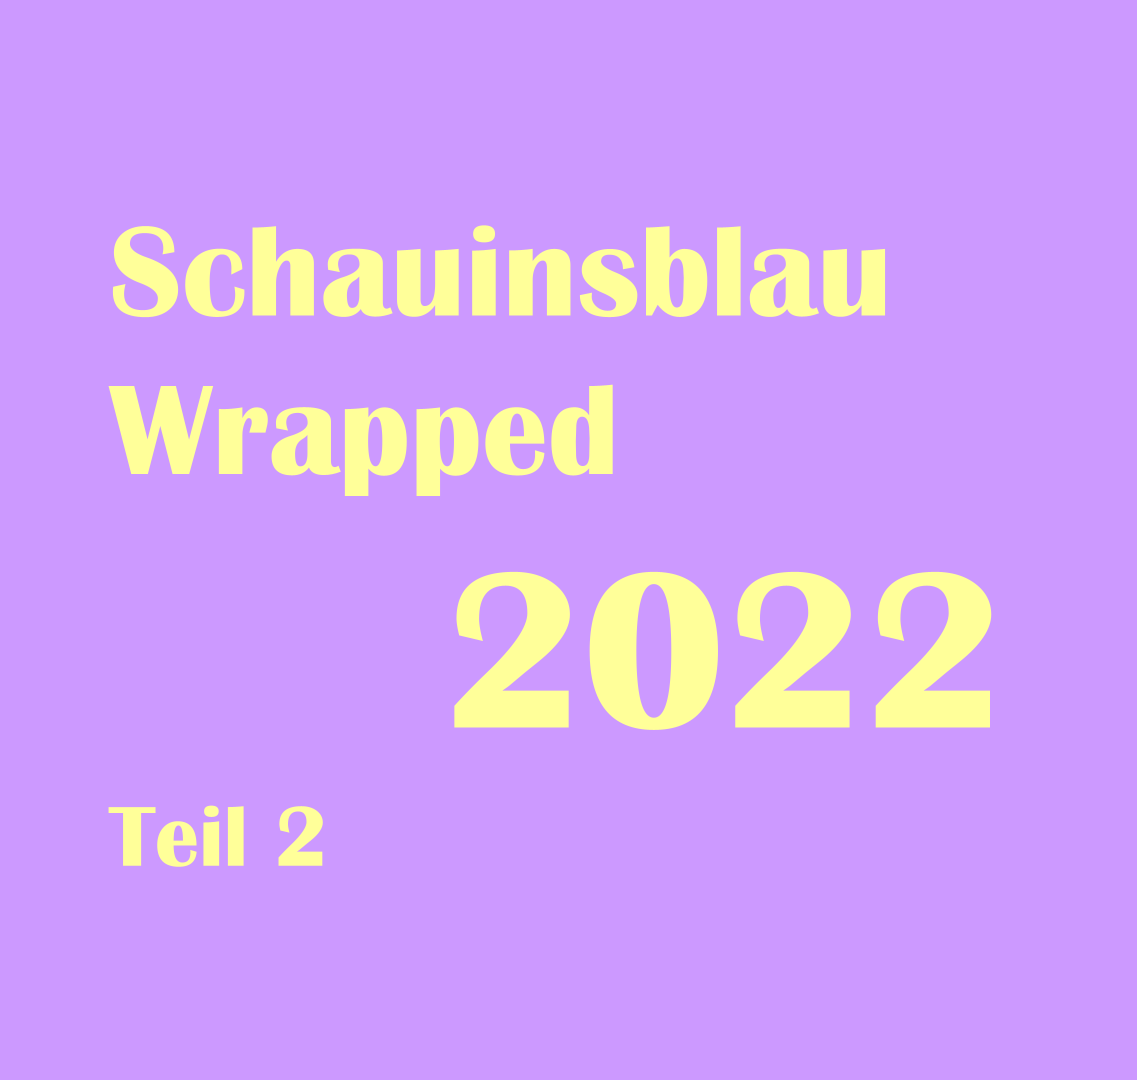 You are currently viewing Schauinsblau Wrapped Teil 2